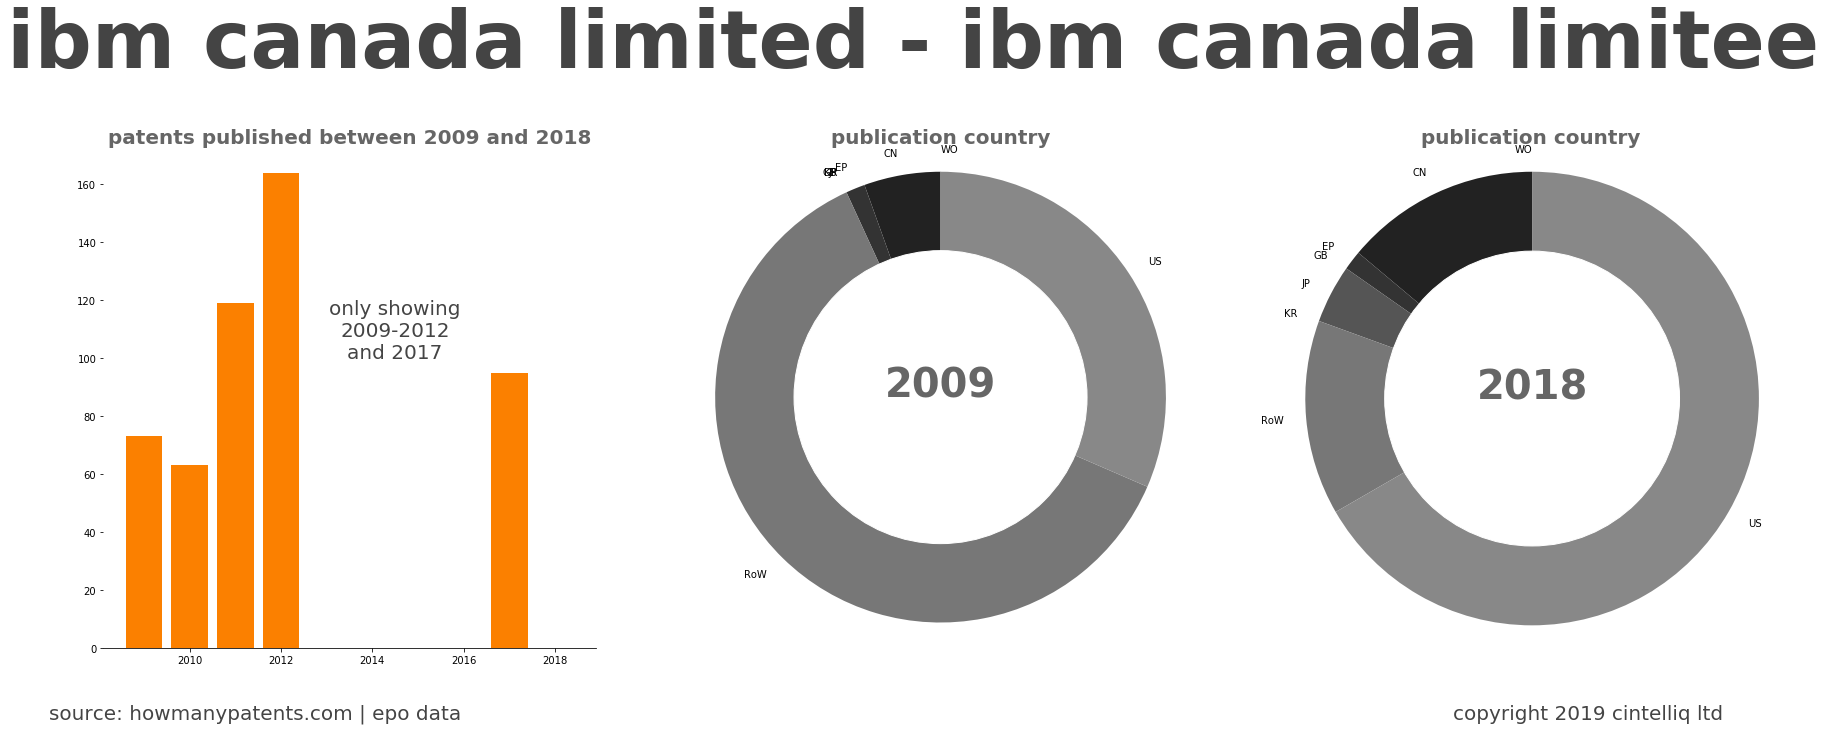 summary of patents for Ibm Canada Limited - Ibm Canada Limitee